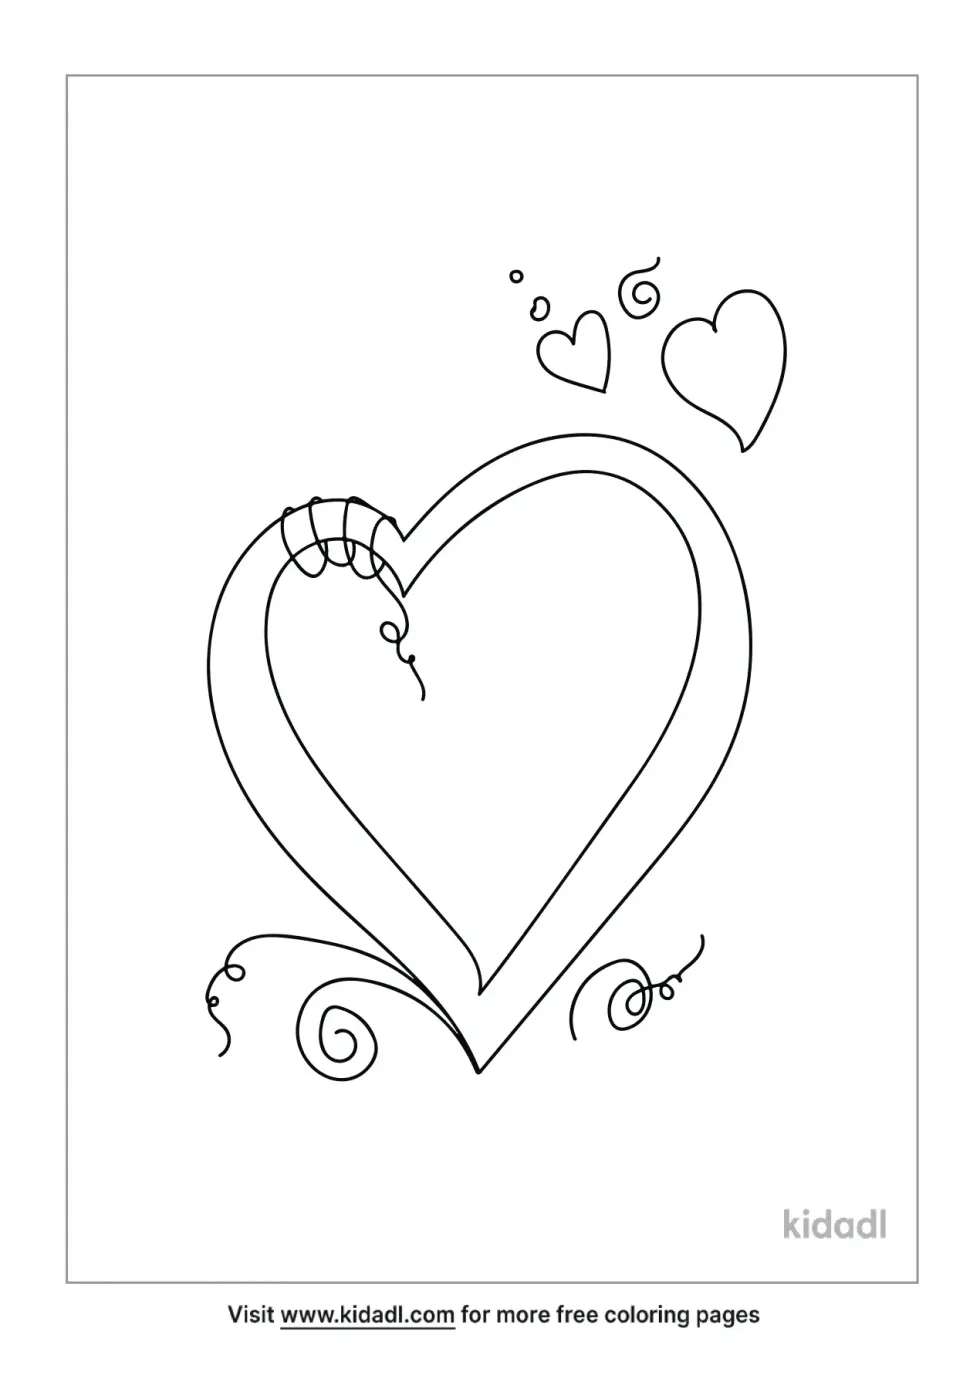 Hearts With Swirls Coloring Page